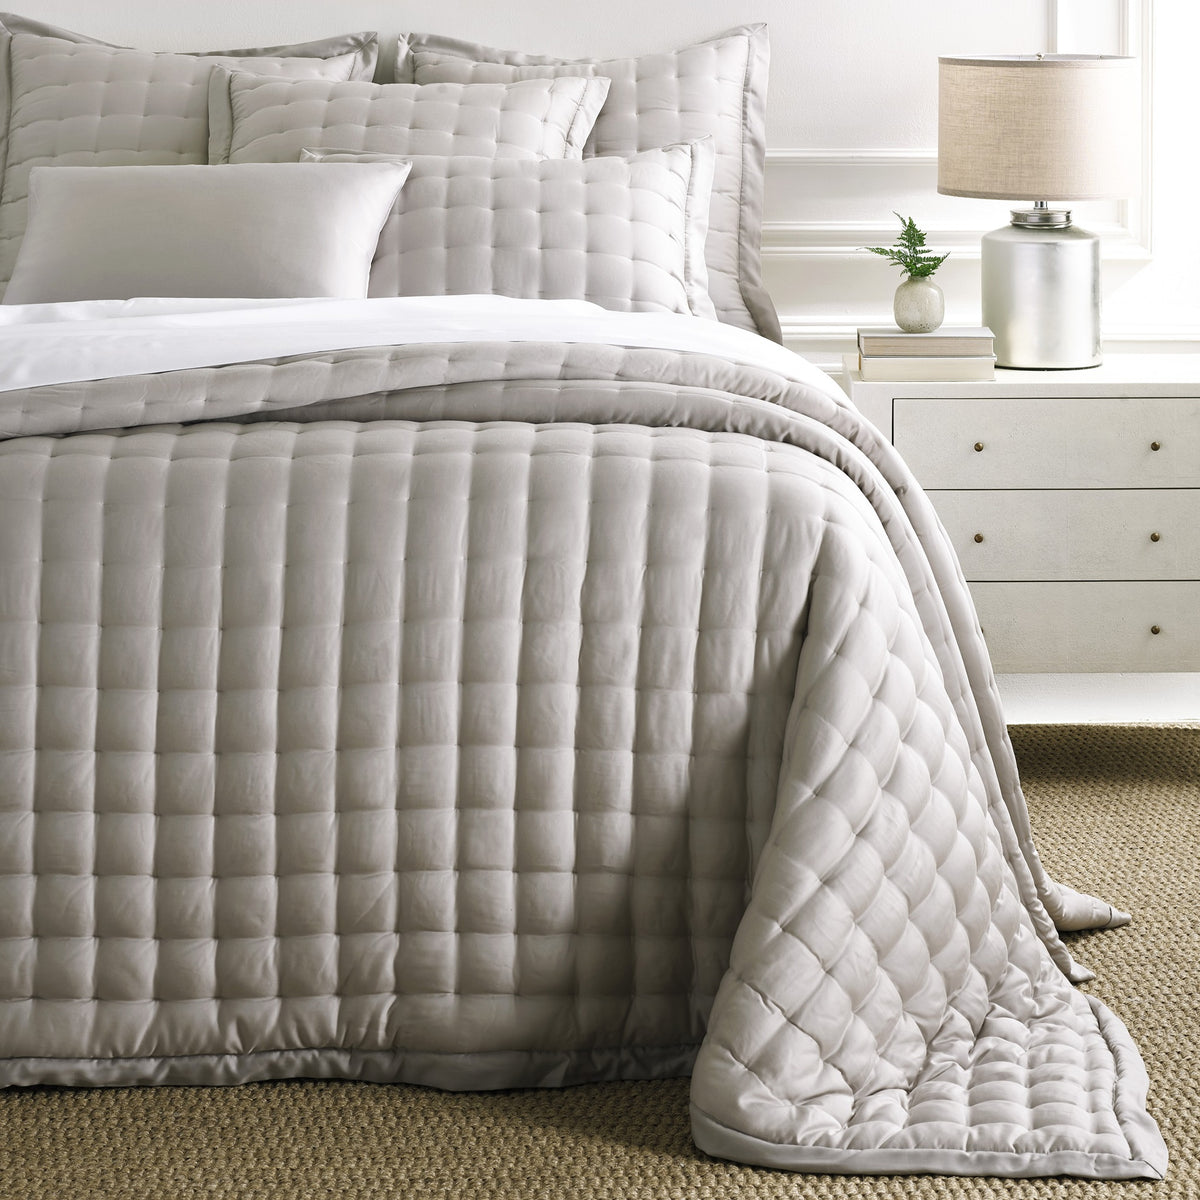 Bed Dressed in Pine Cone Hill Silken Solid Puff in Color Grey